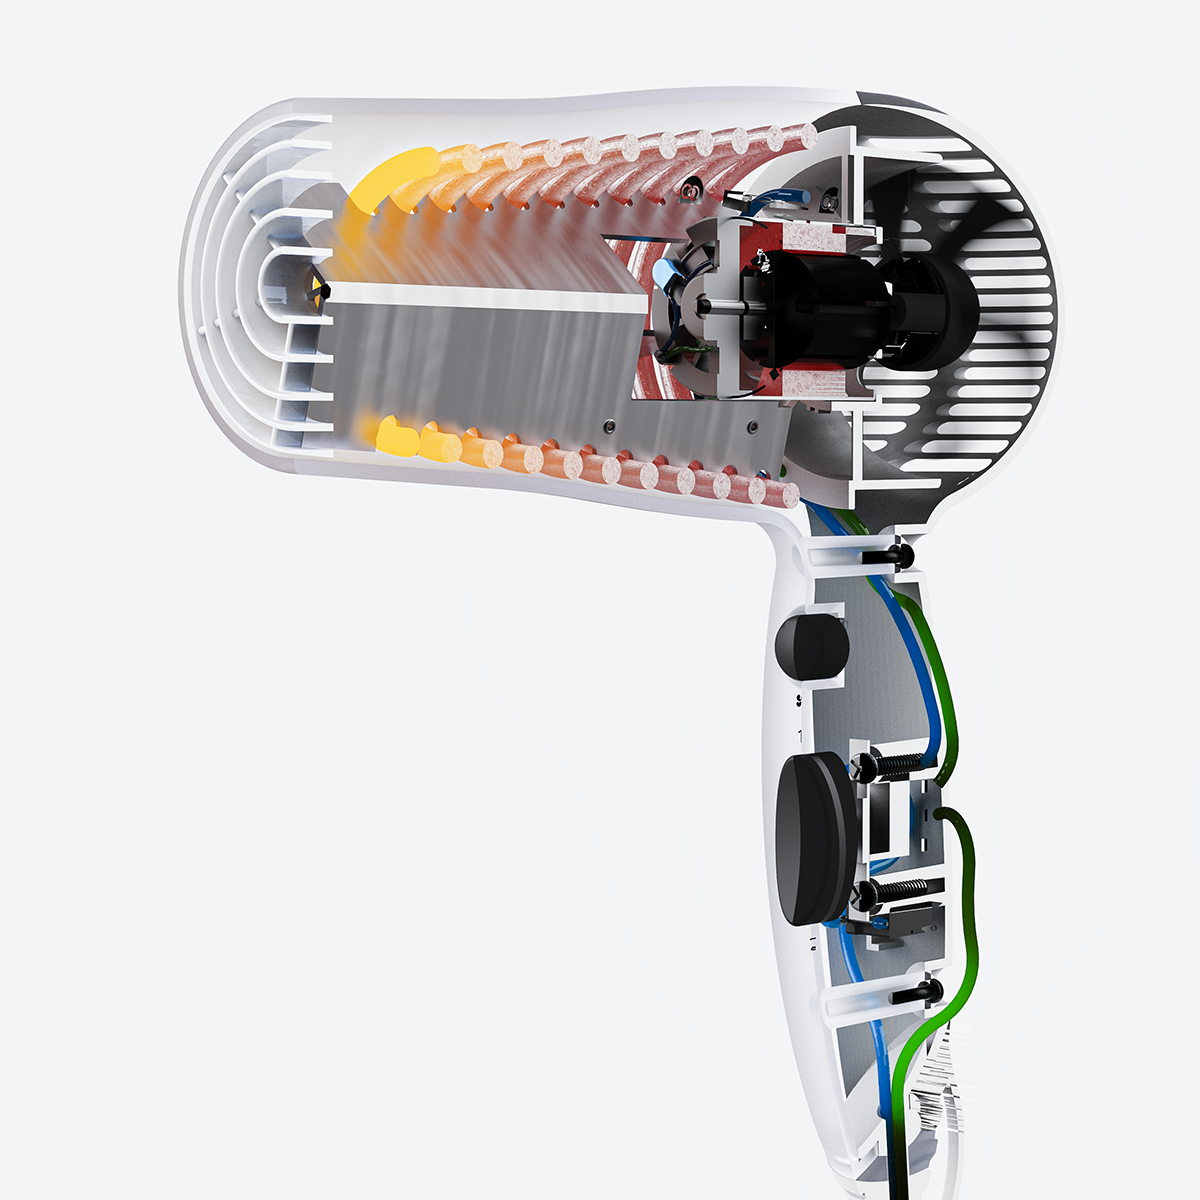 Rendering of a translucent hairdryer, cut in half